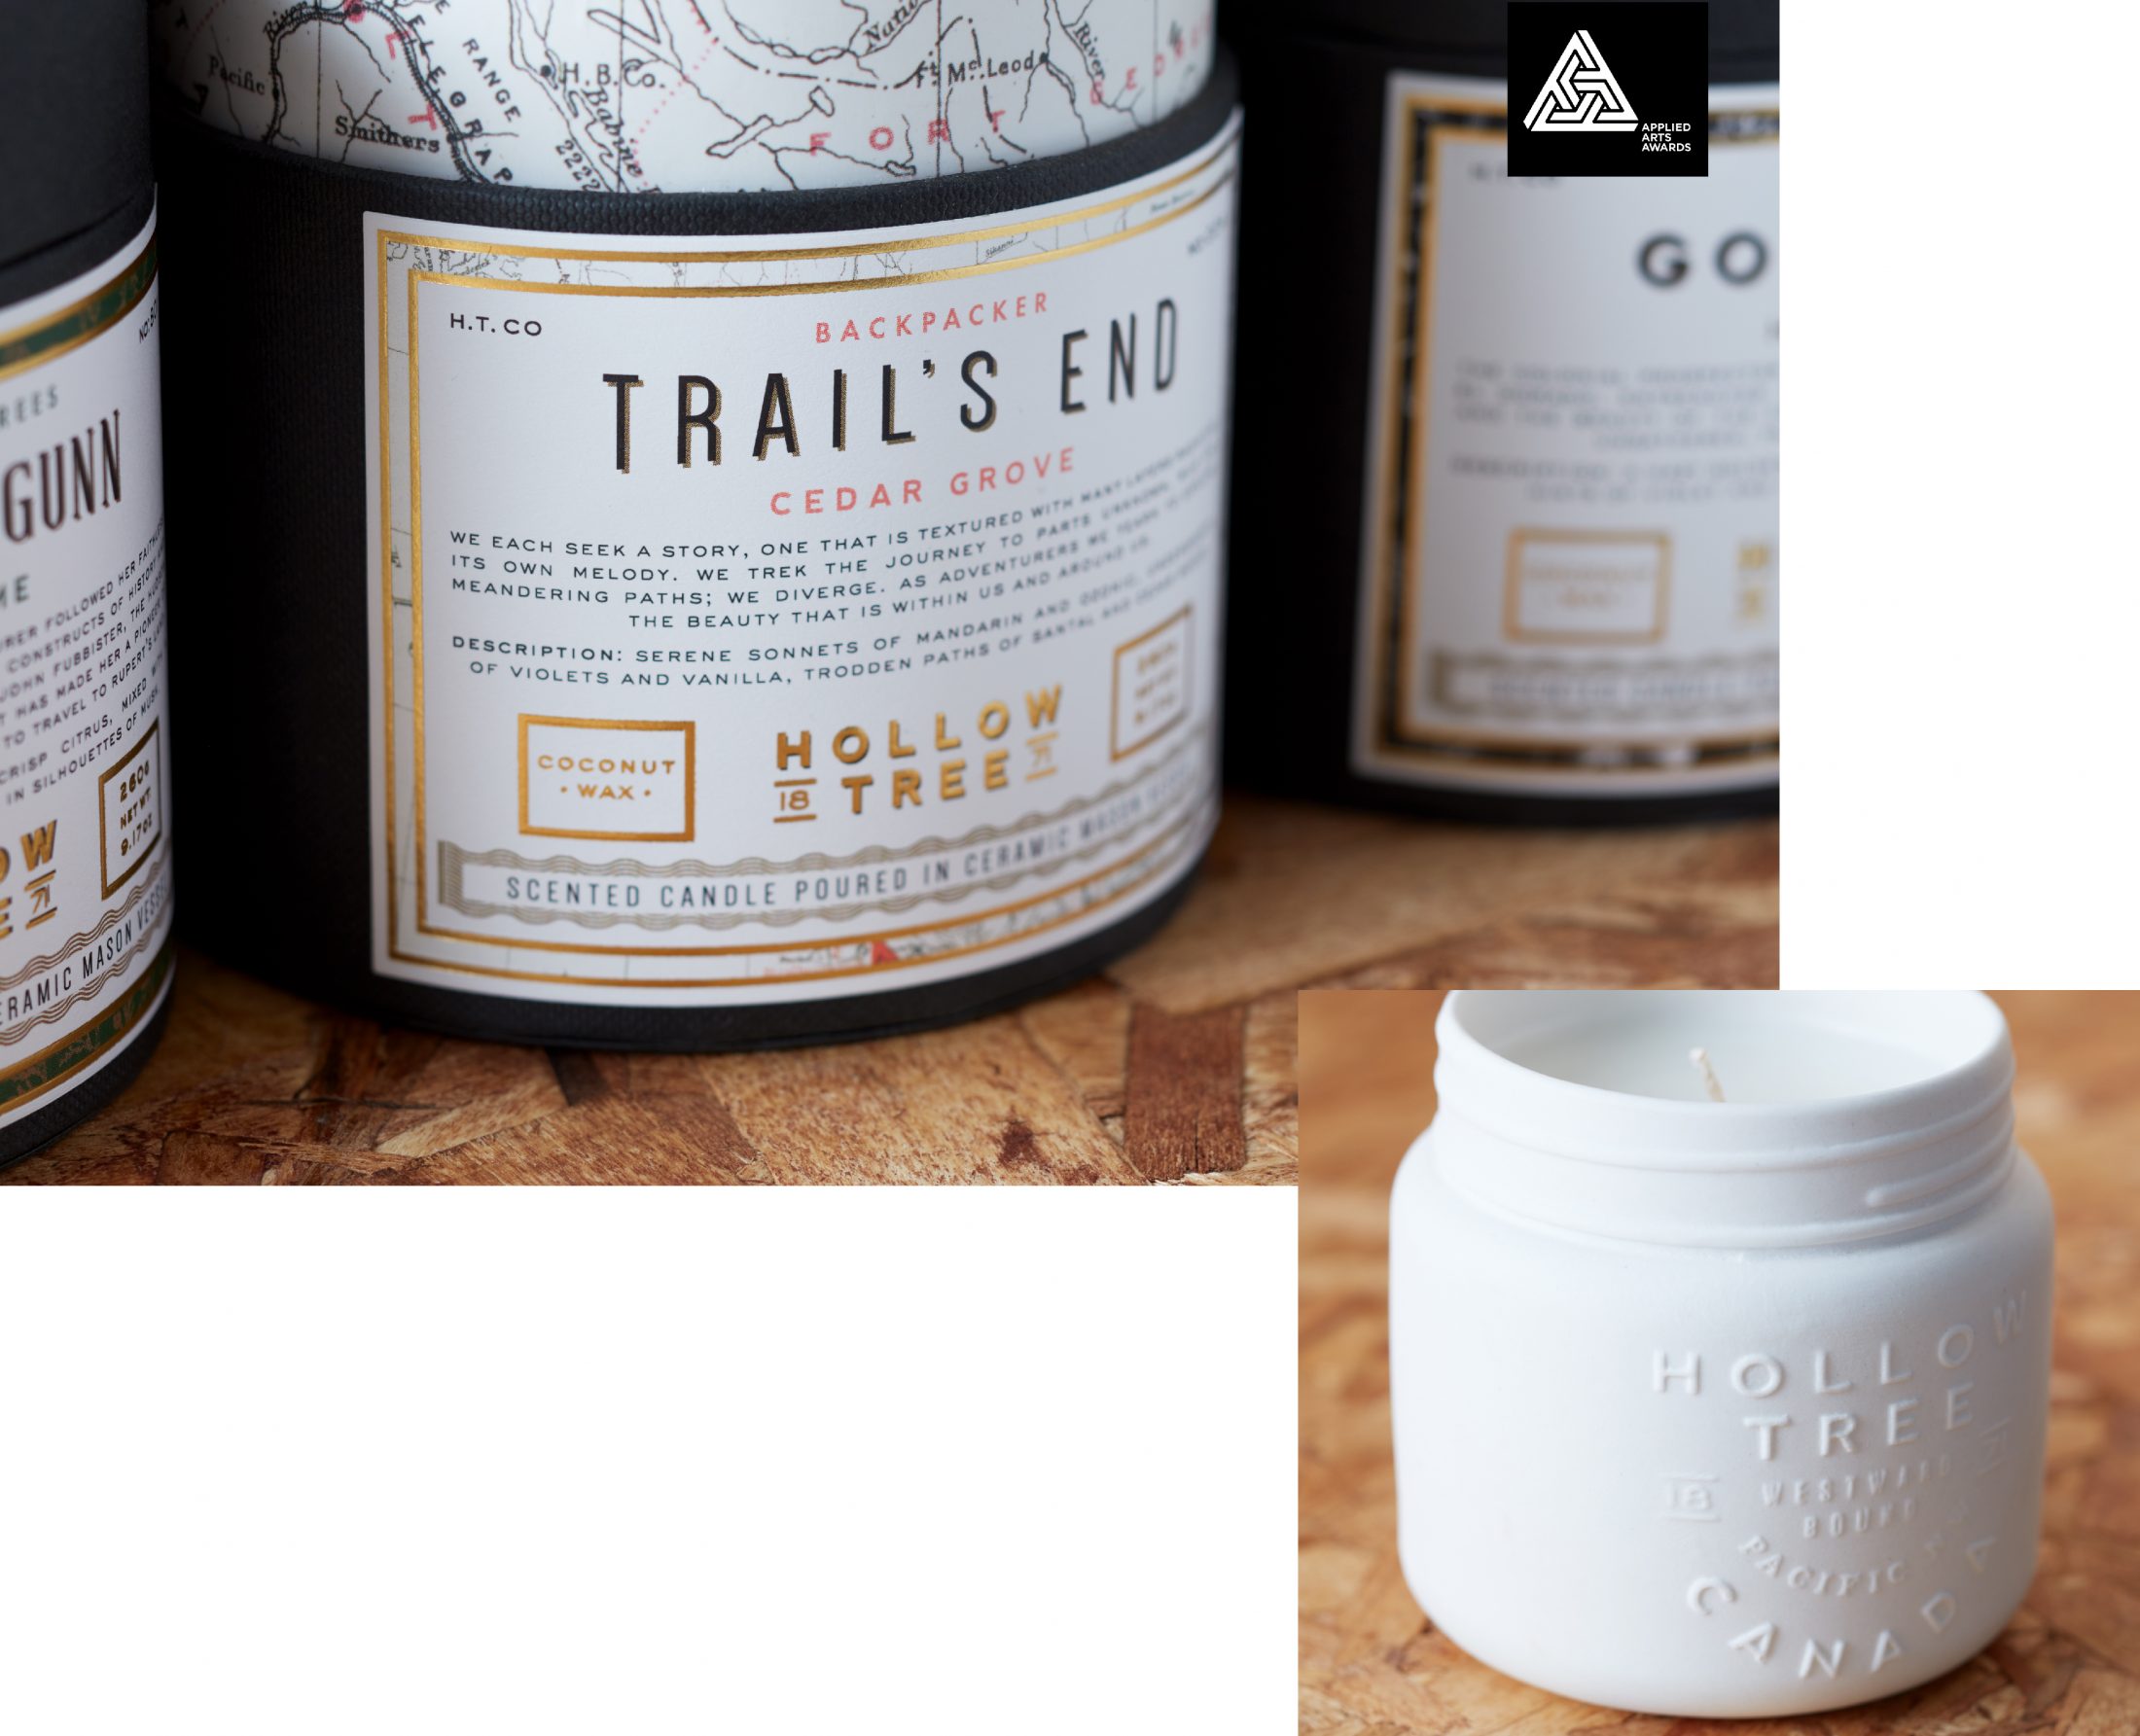 Award winning packaging and branding design for candle company Hollow Tree.